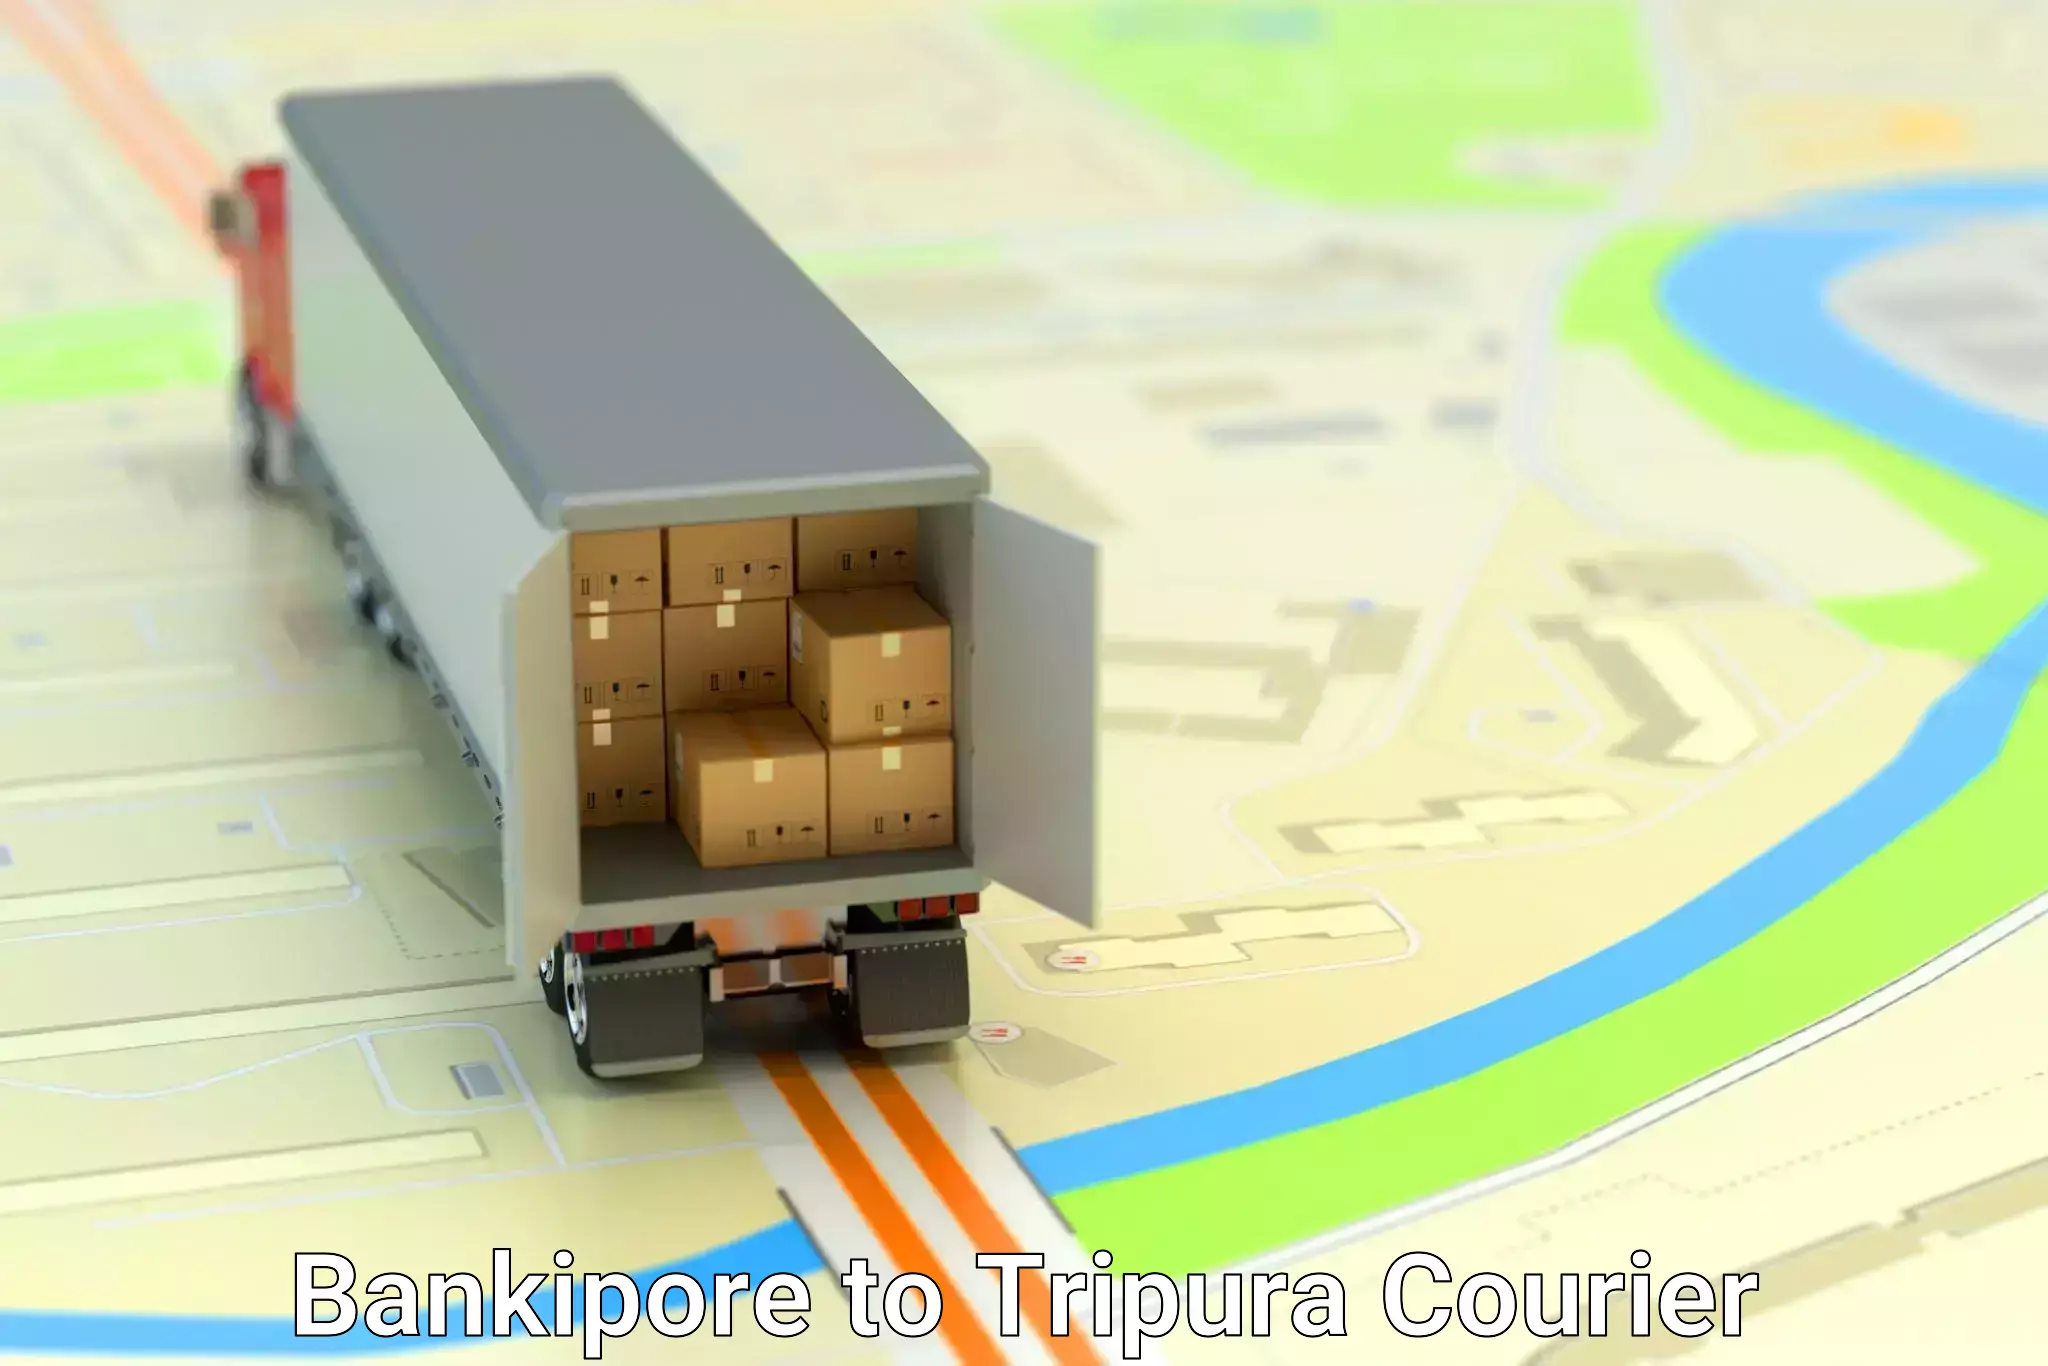 Furniture delivery service Bankipore to South Tripura